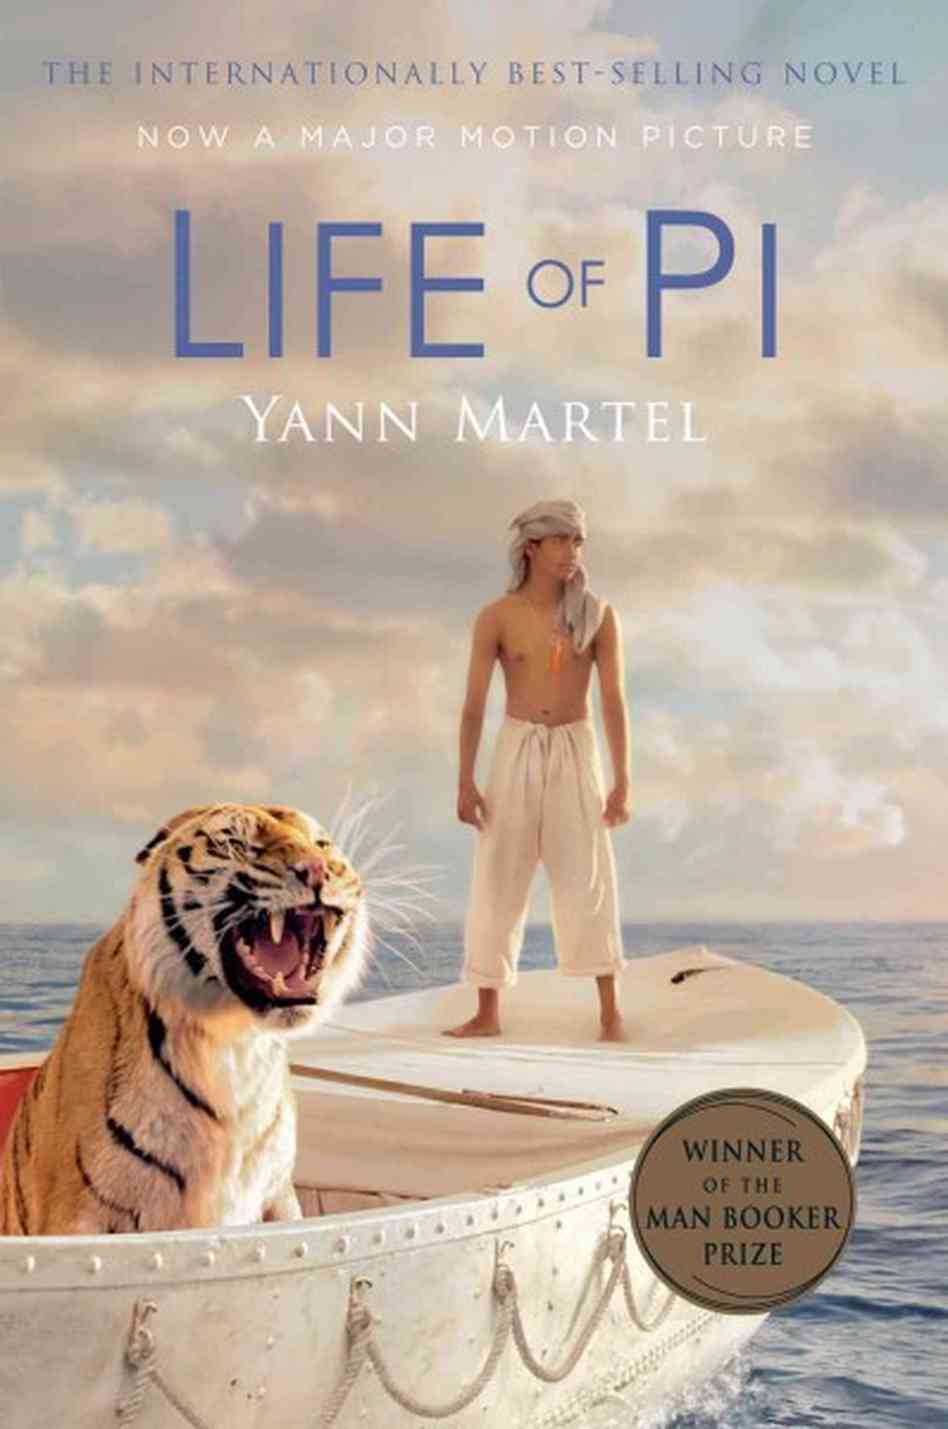 One of our recommended books is Life of Pi by Yann Martel